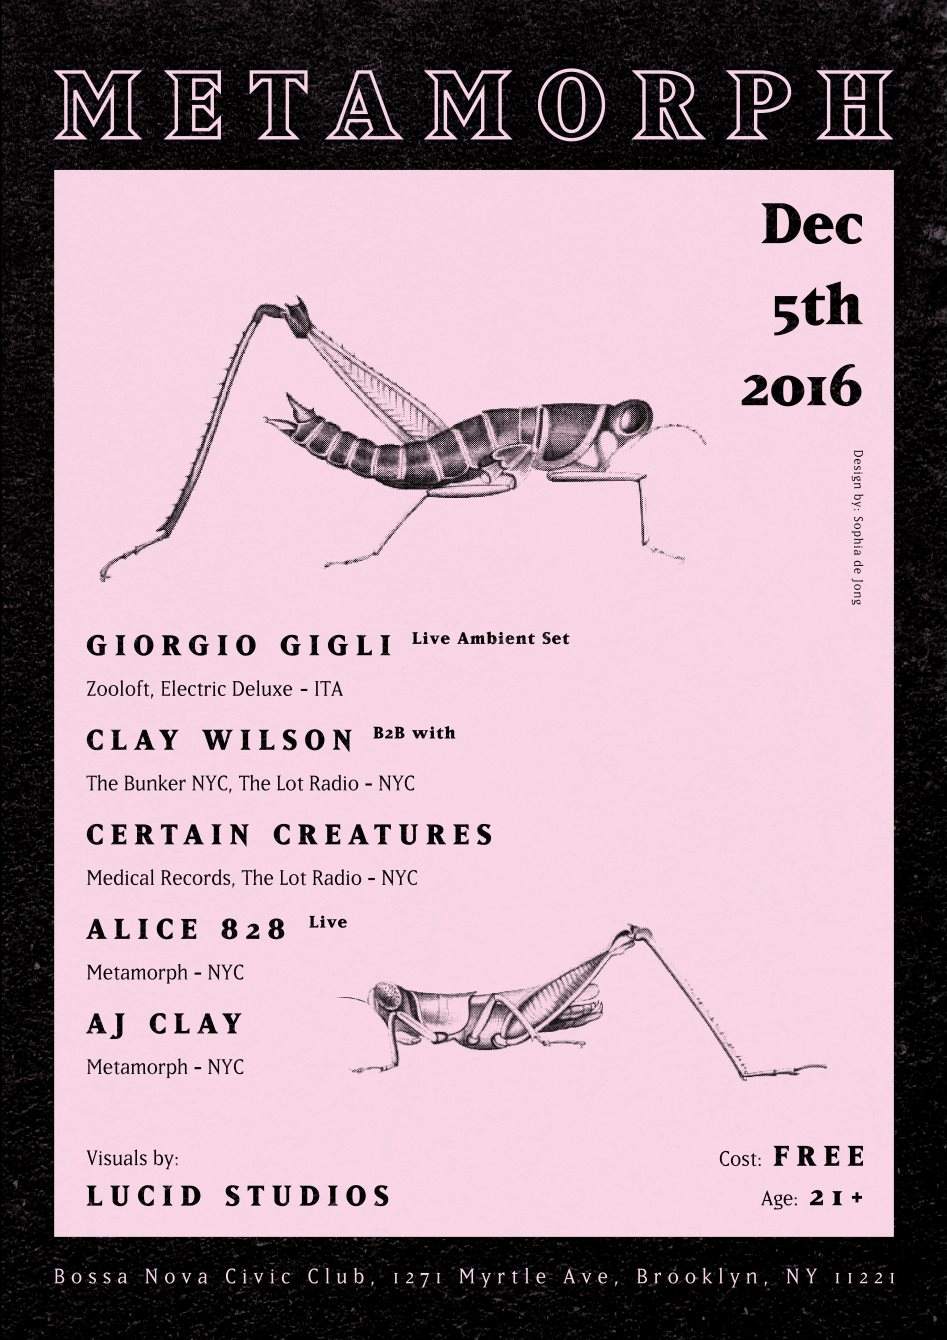 Giorgio Gigli Live Ambient with Clay Wilson B2B Certain Creatures, Stress, & More - Página trasera